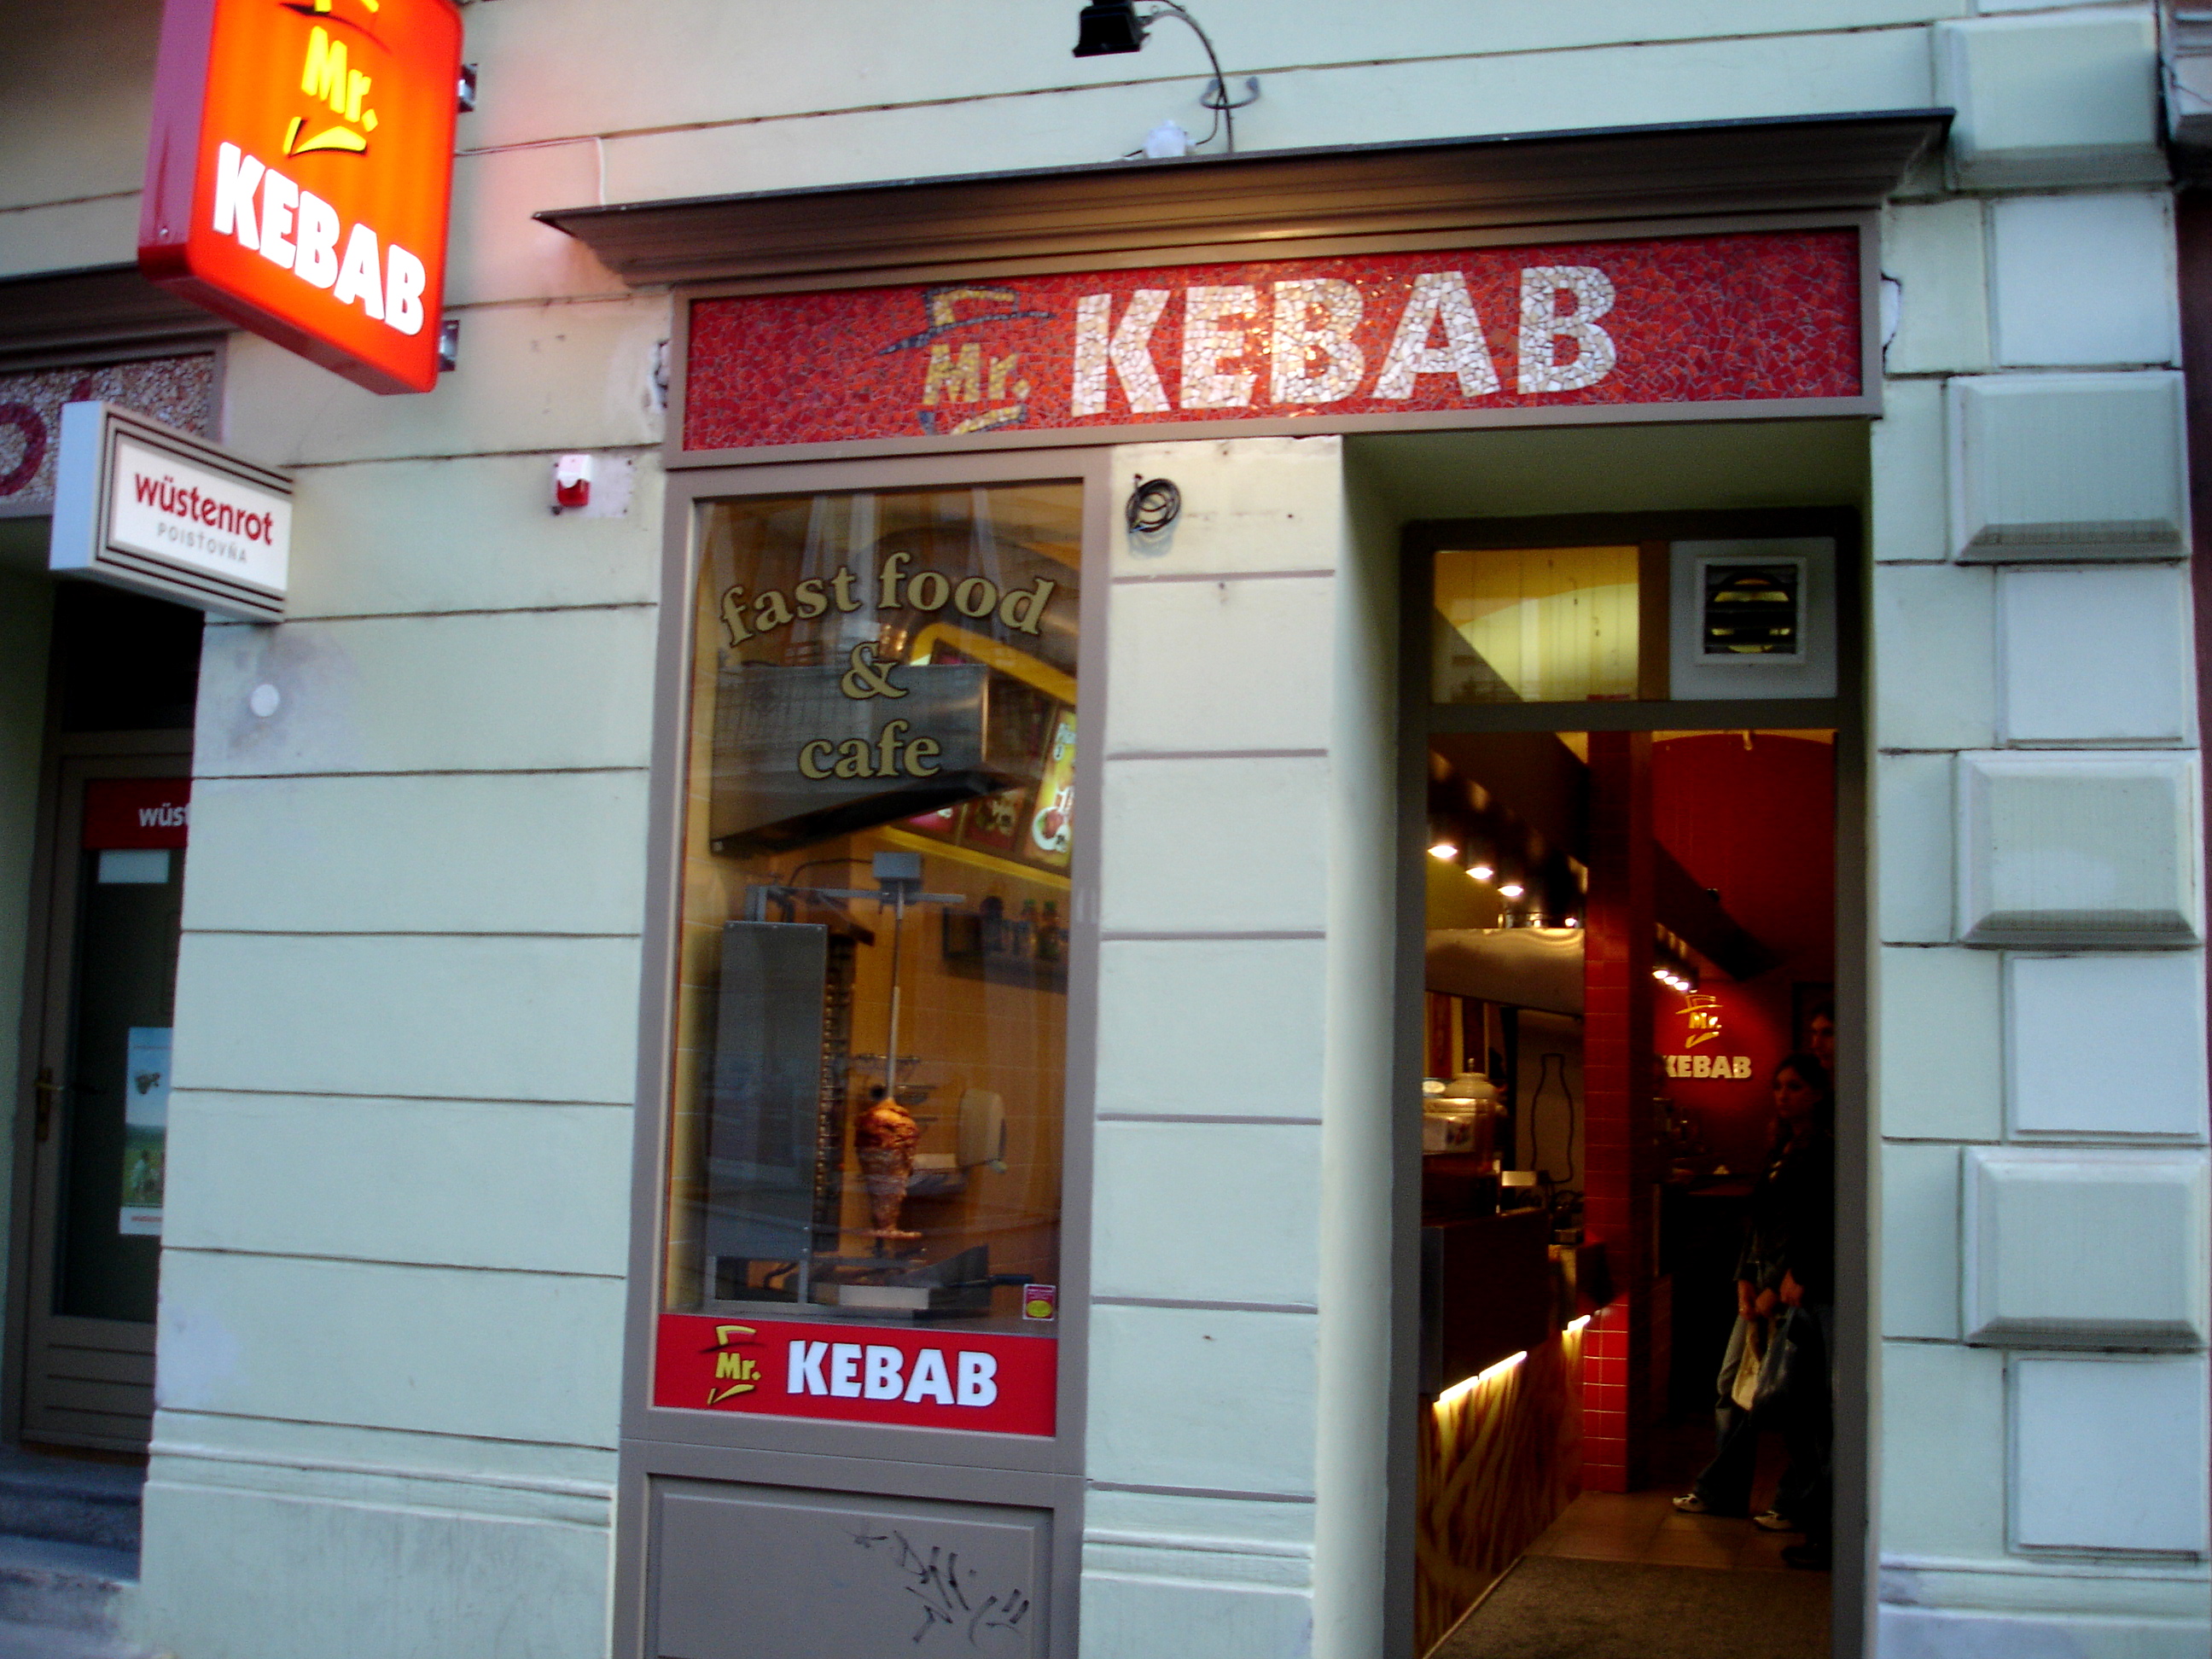 [First store Mr. Kebab in Slovakia]